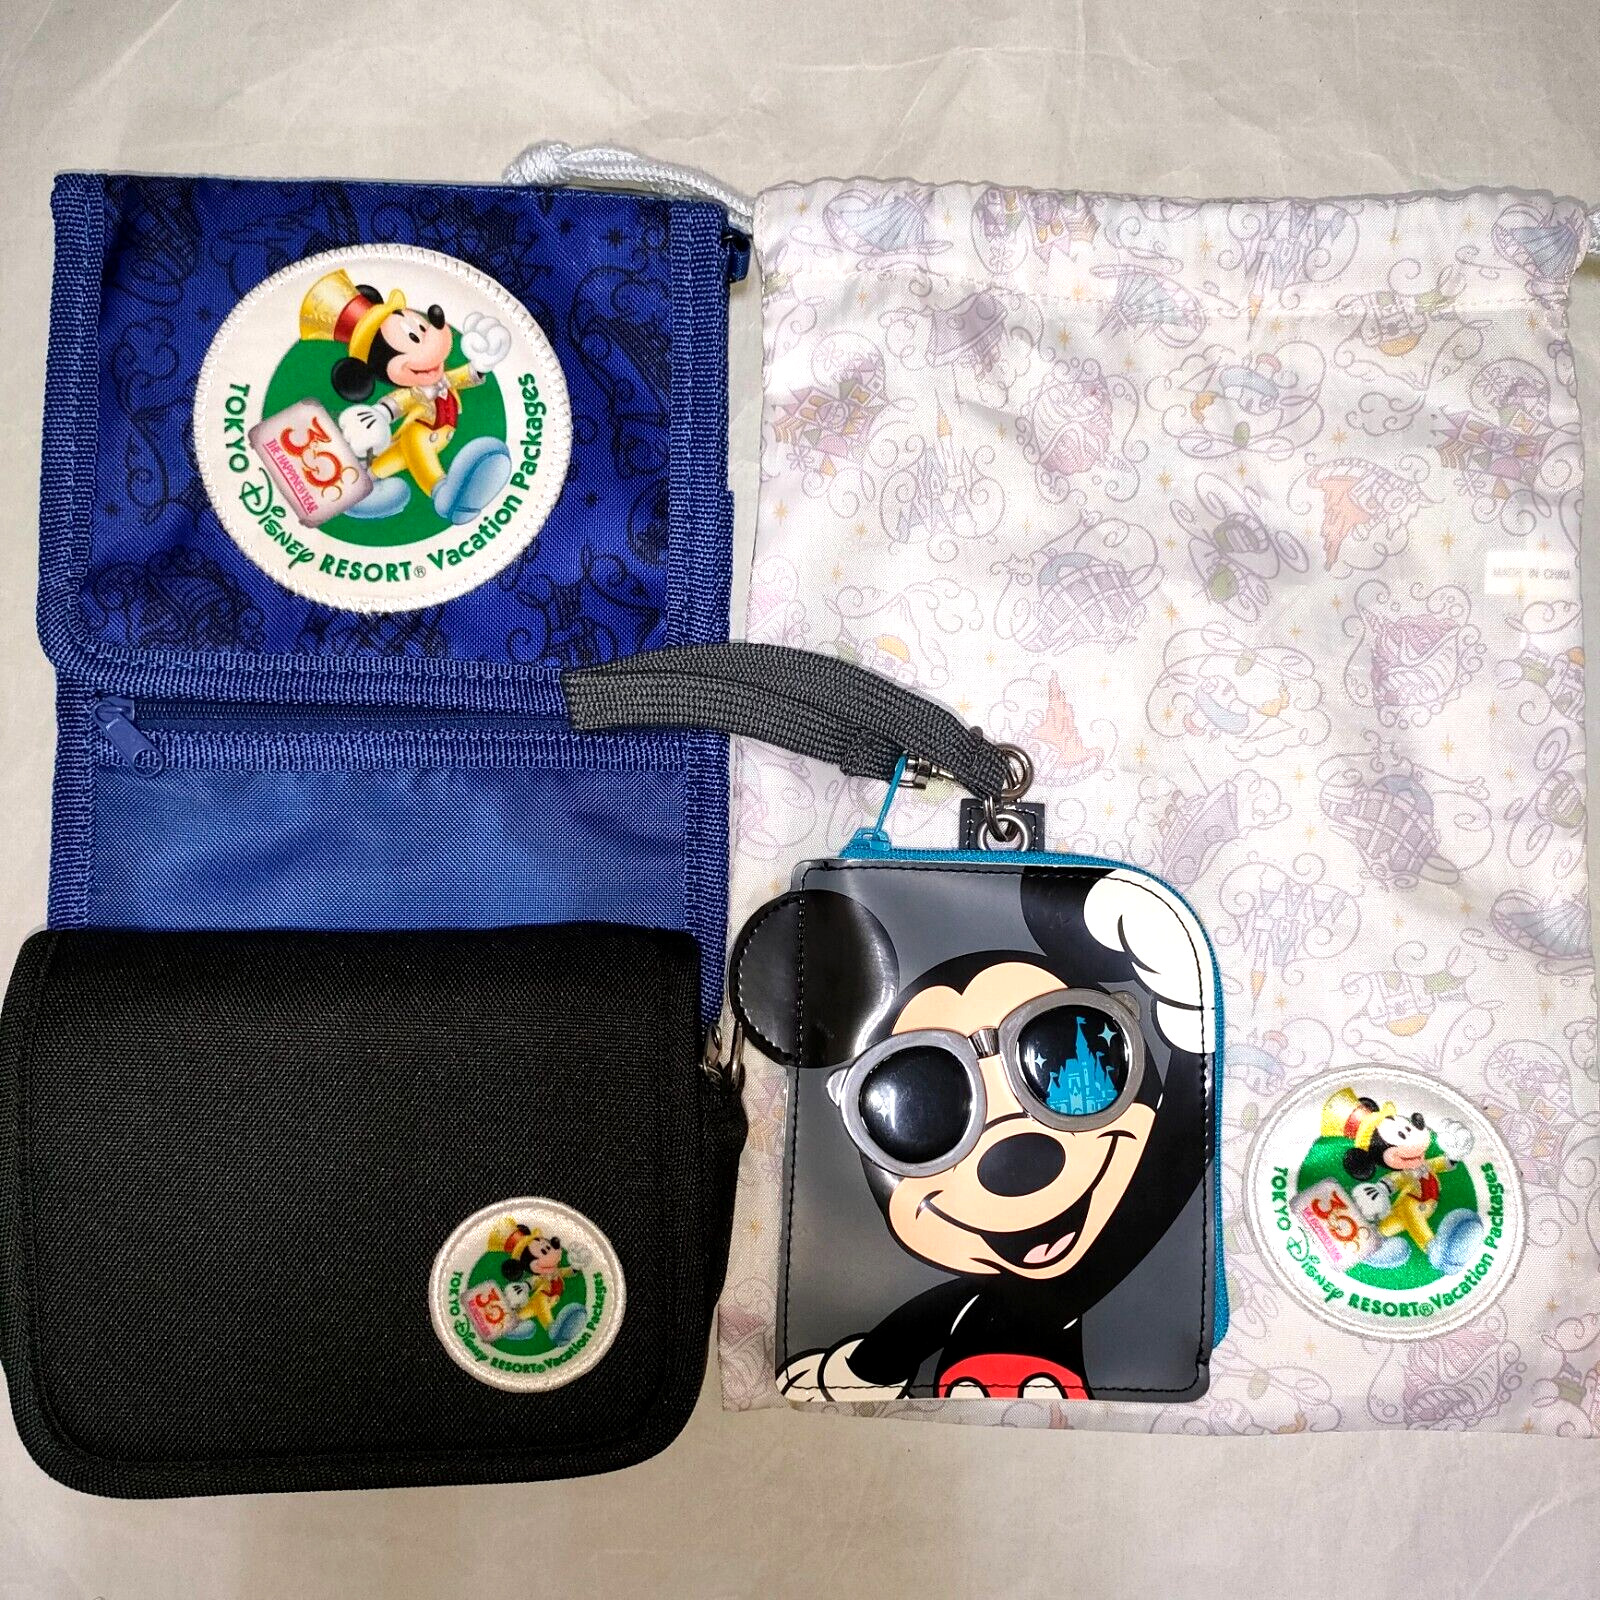 Tokyo Disney Resort Official Vacation Packages Bag & Pouch 4 types set Very rare